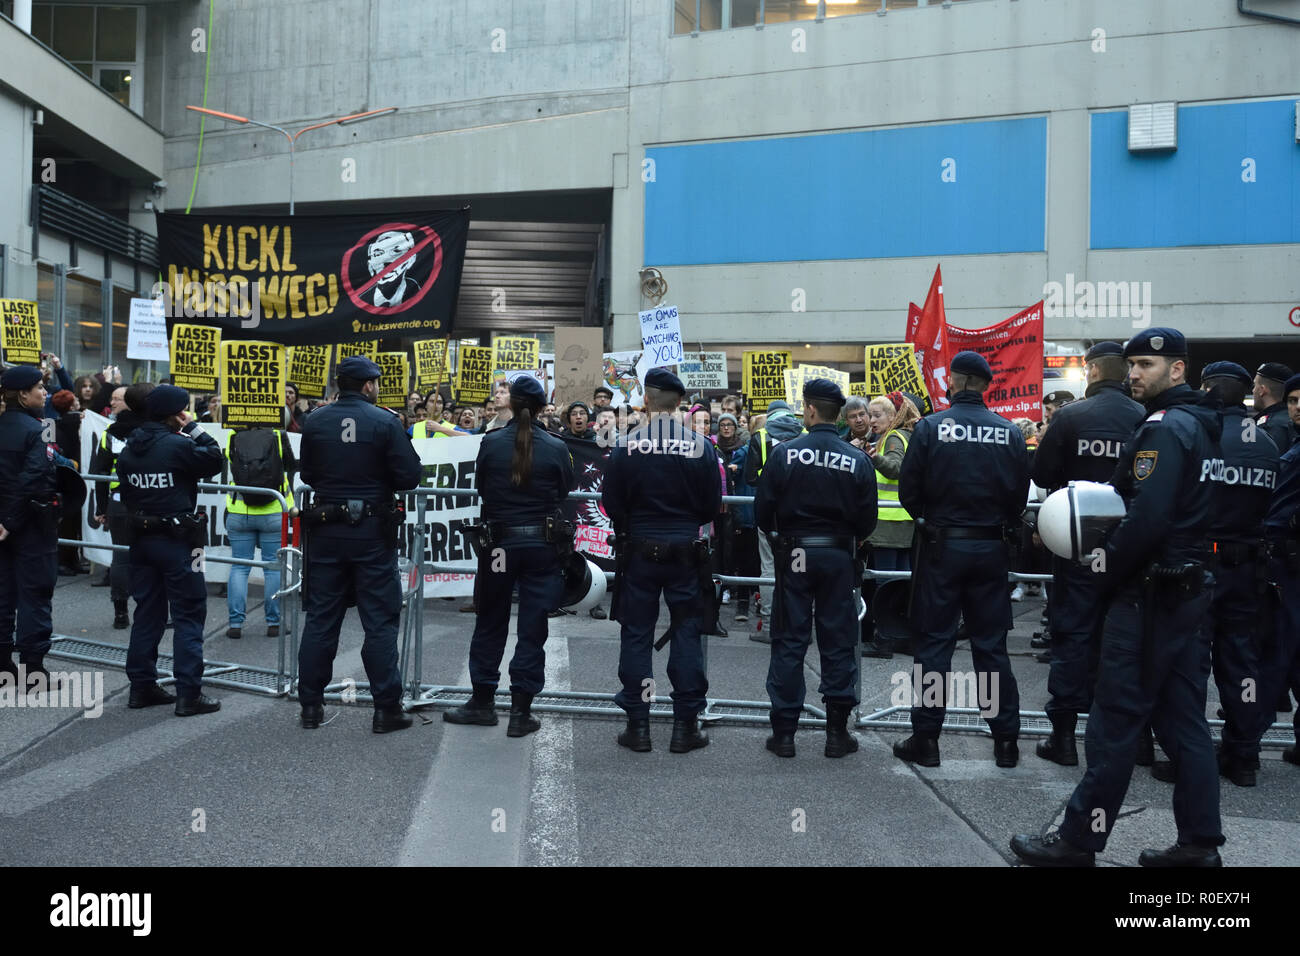 Vienna, Austria. 4 November 2018. Demonstration of the 'Stop the Pact' initiative a demonstration against the UN Migration Pact. Initiator of the platform 'Stop the Pact' is the leader of the 'Identitarian Movement Austria', Martin Sellner. Picture shows left counter demonstrators. Credit: Franz Perc / Alamy Live News Stock Photo